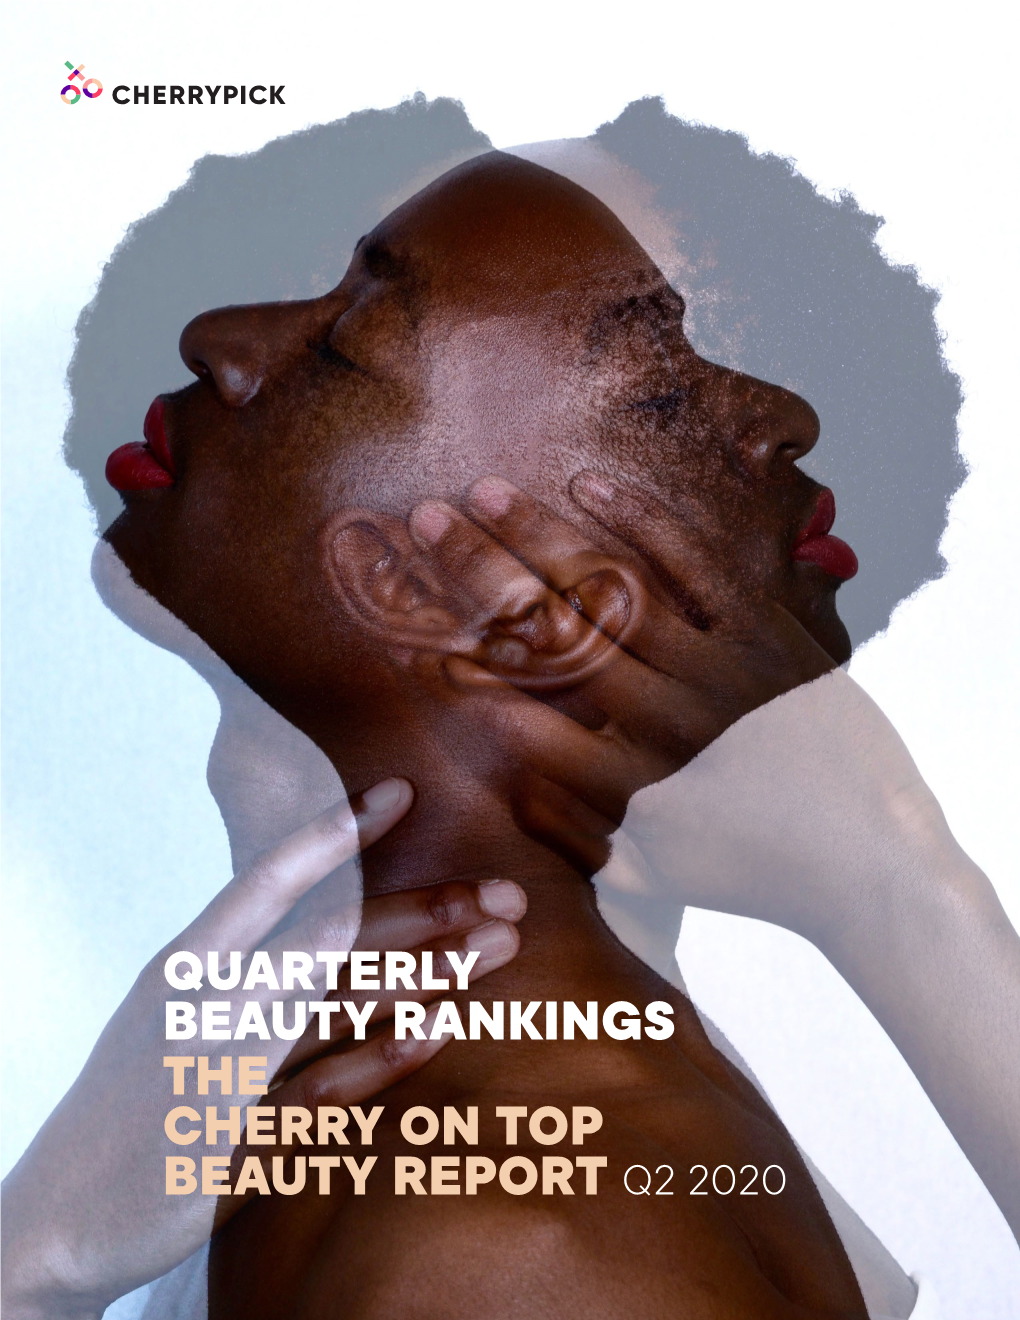 Quarterly Beauty Rankings the Cherry on Top Beauty Report Q2 2020 Quarterly Beauty Rankings | Q2 2020 the Cherry on Top Beauty Report